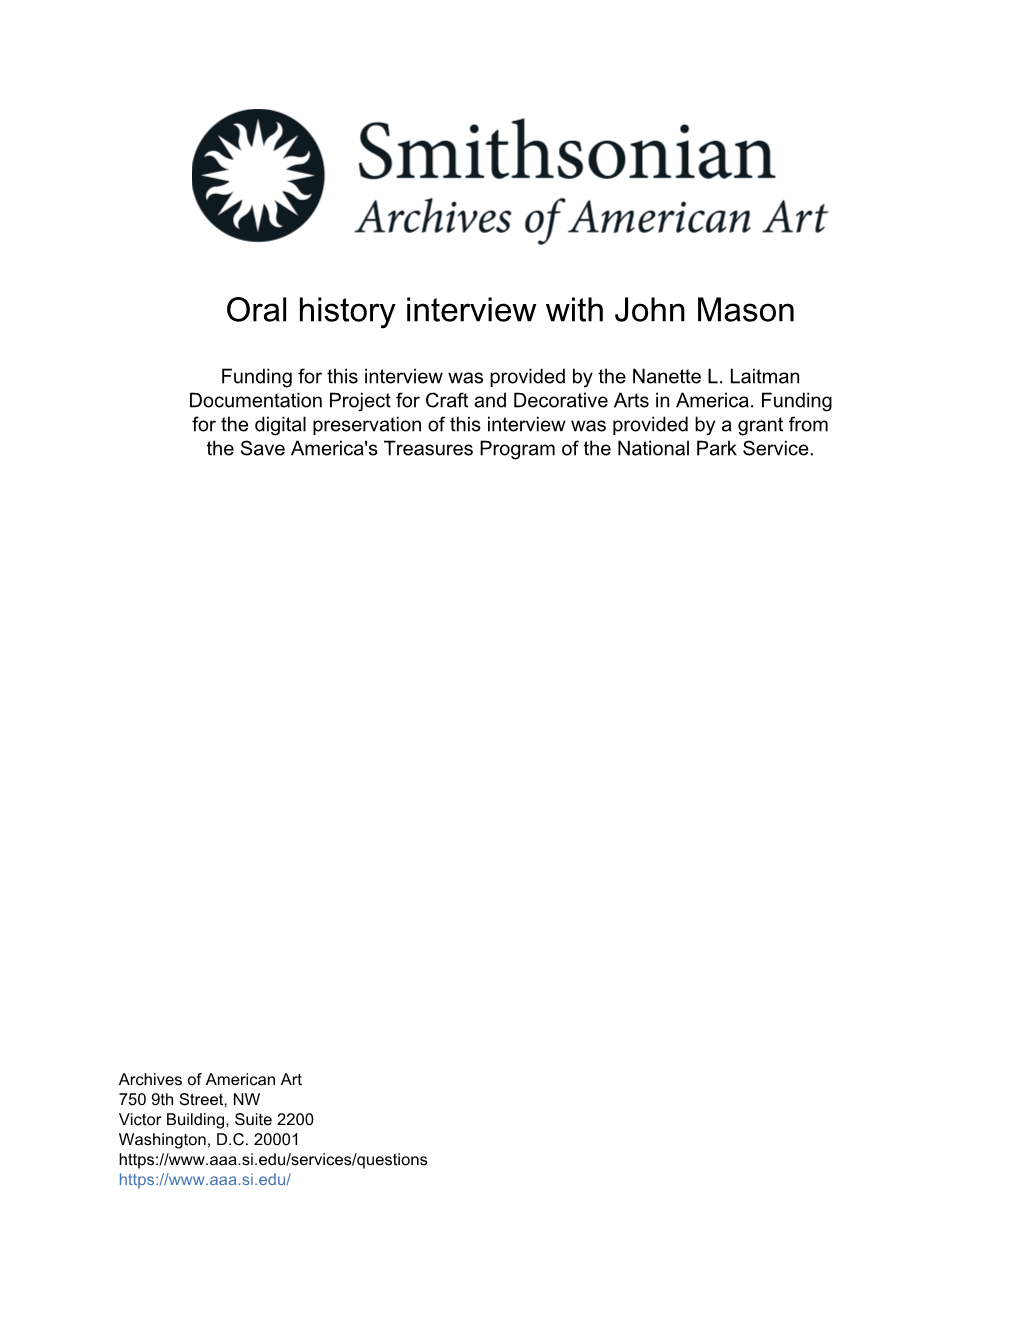 Oral History Interview with John Mason